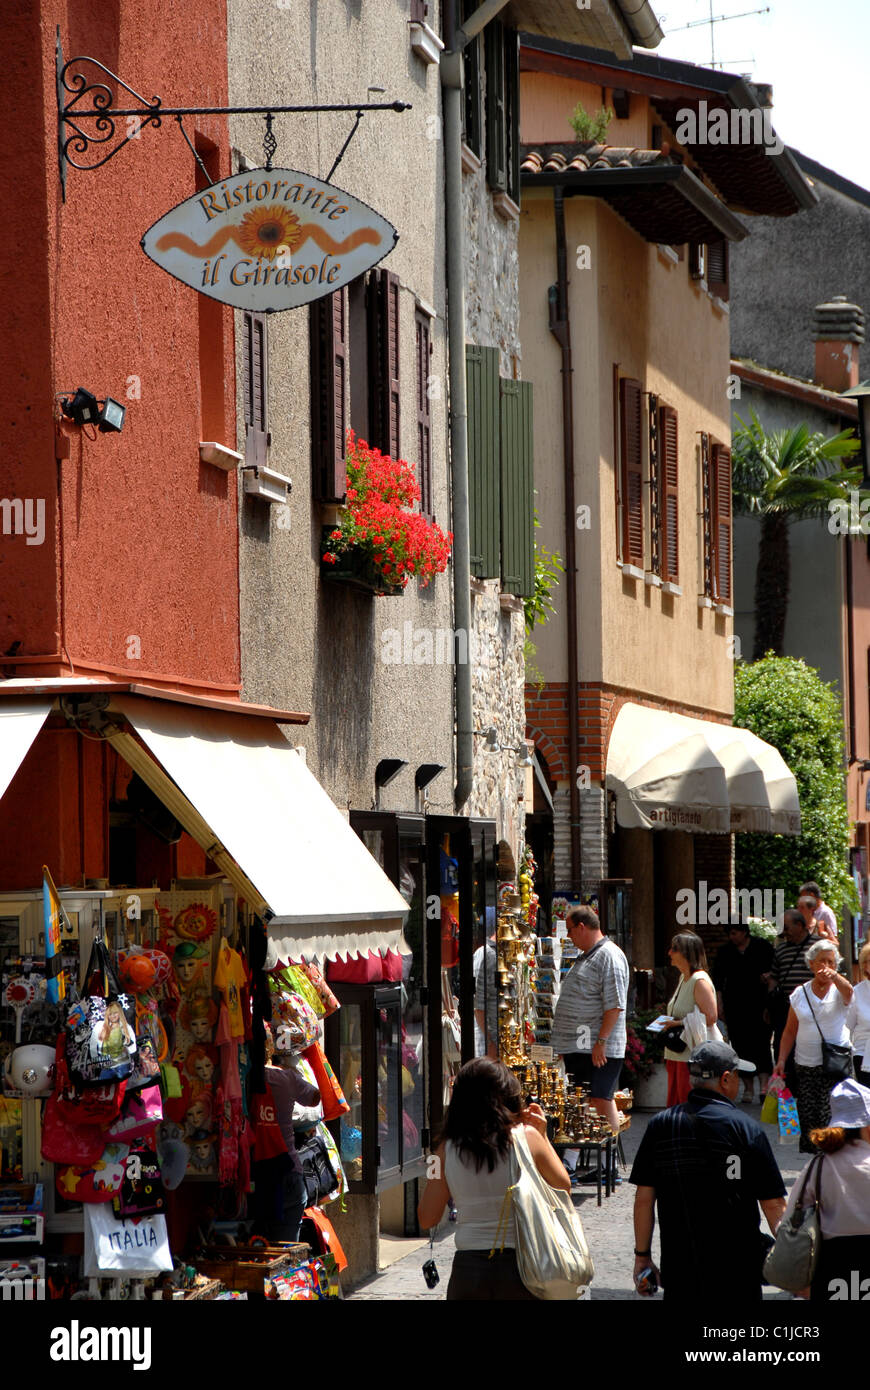 Street with tourists and shops, Sirmione, Lake Garda, Italy Stock Photo